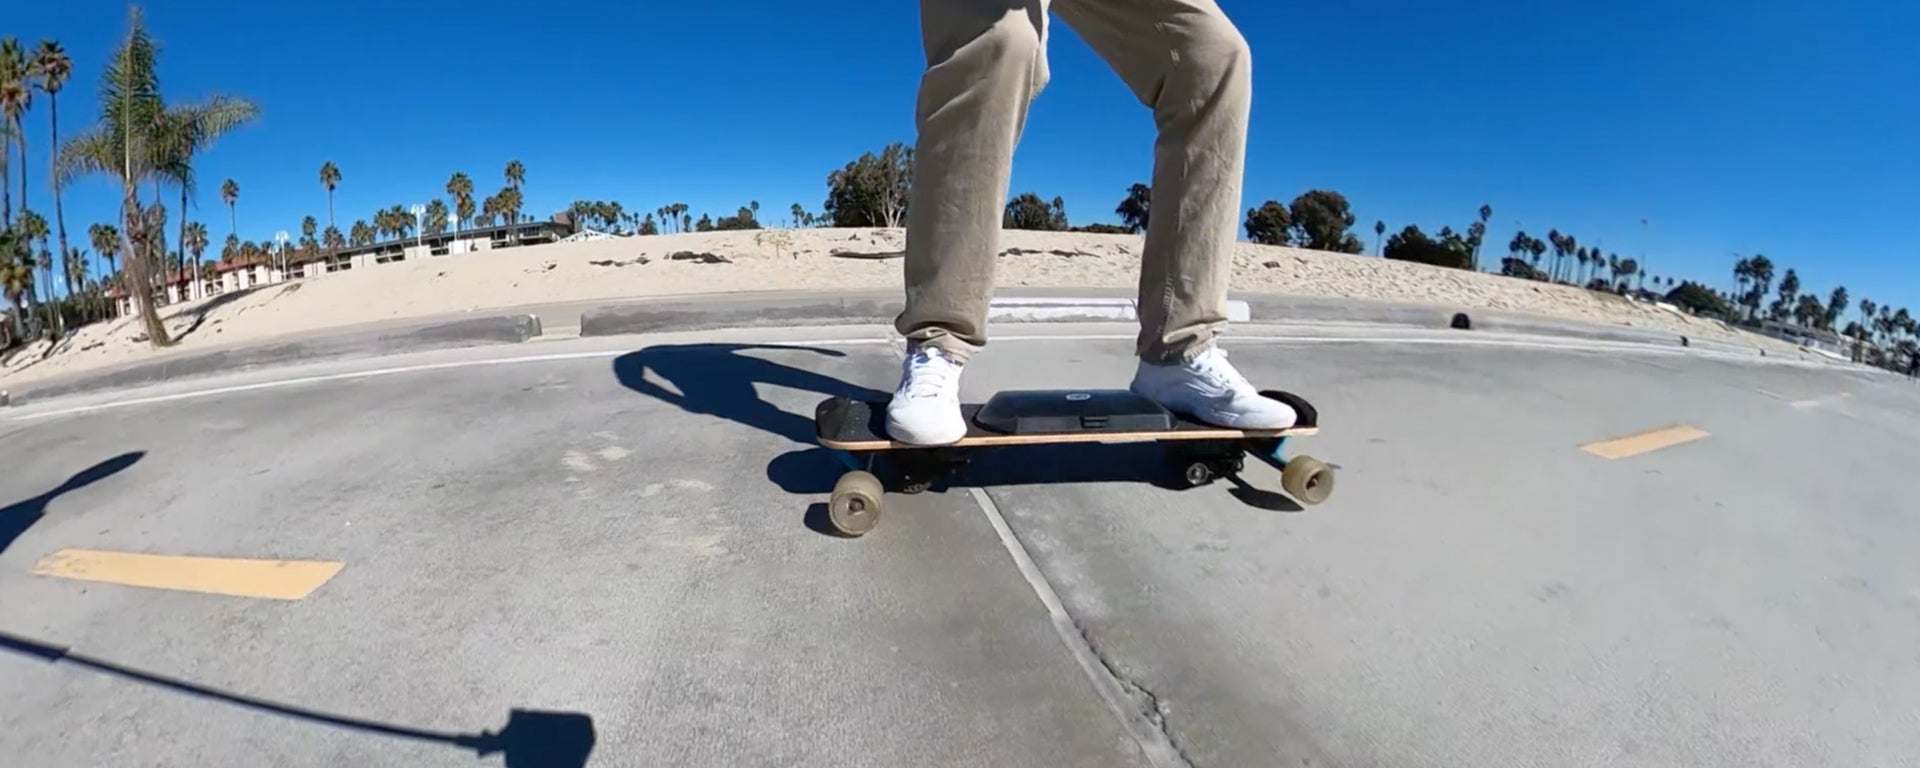 Summerboard  Electric Skateboards that move like Snowboards